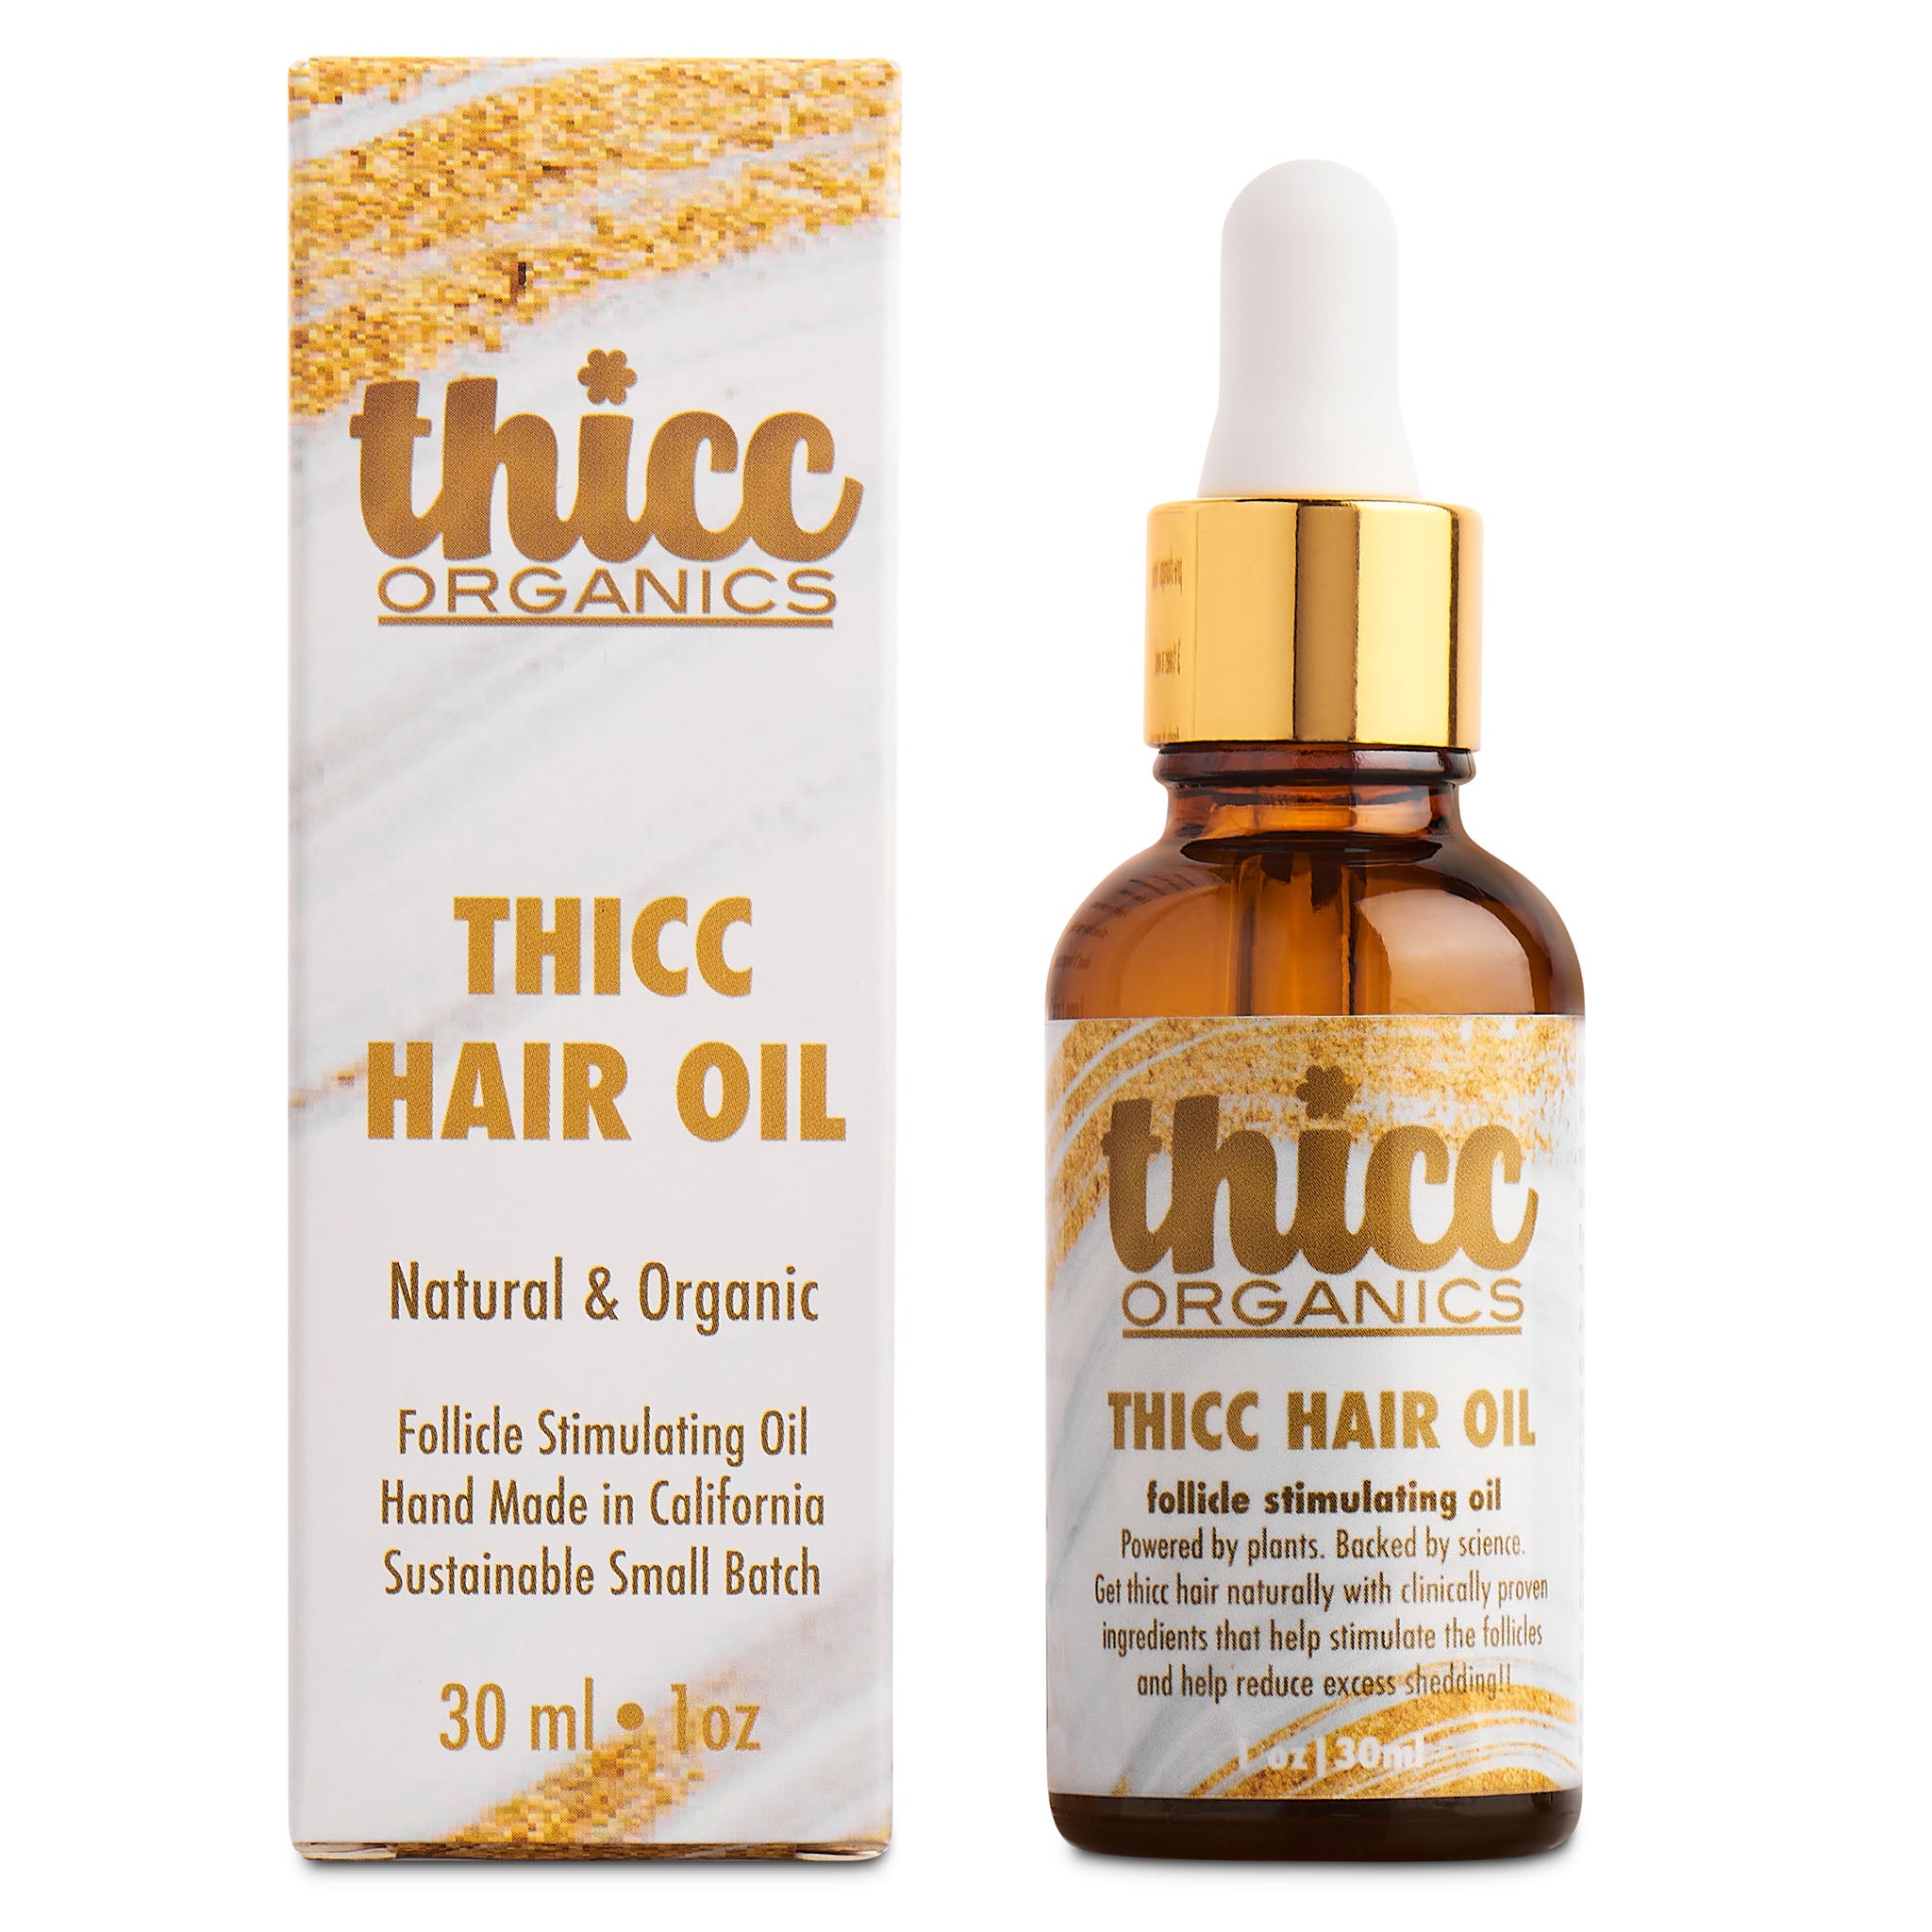 Thicc Hair Oil - Follicle Stimulating, DHT Blocking.